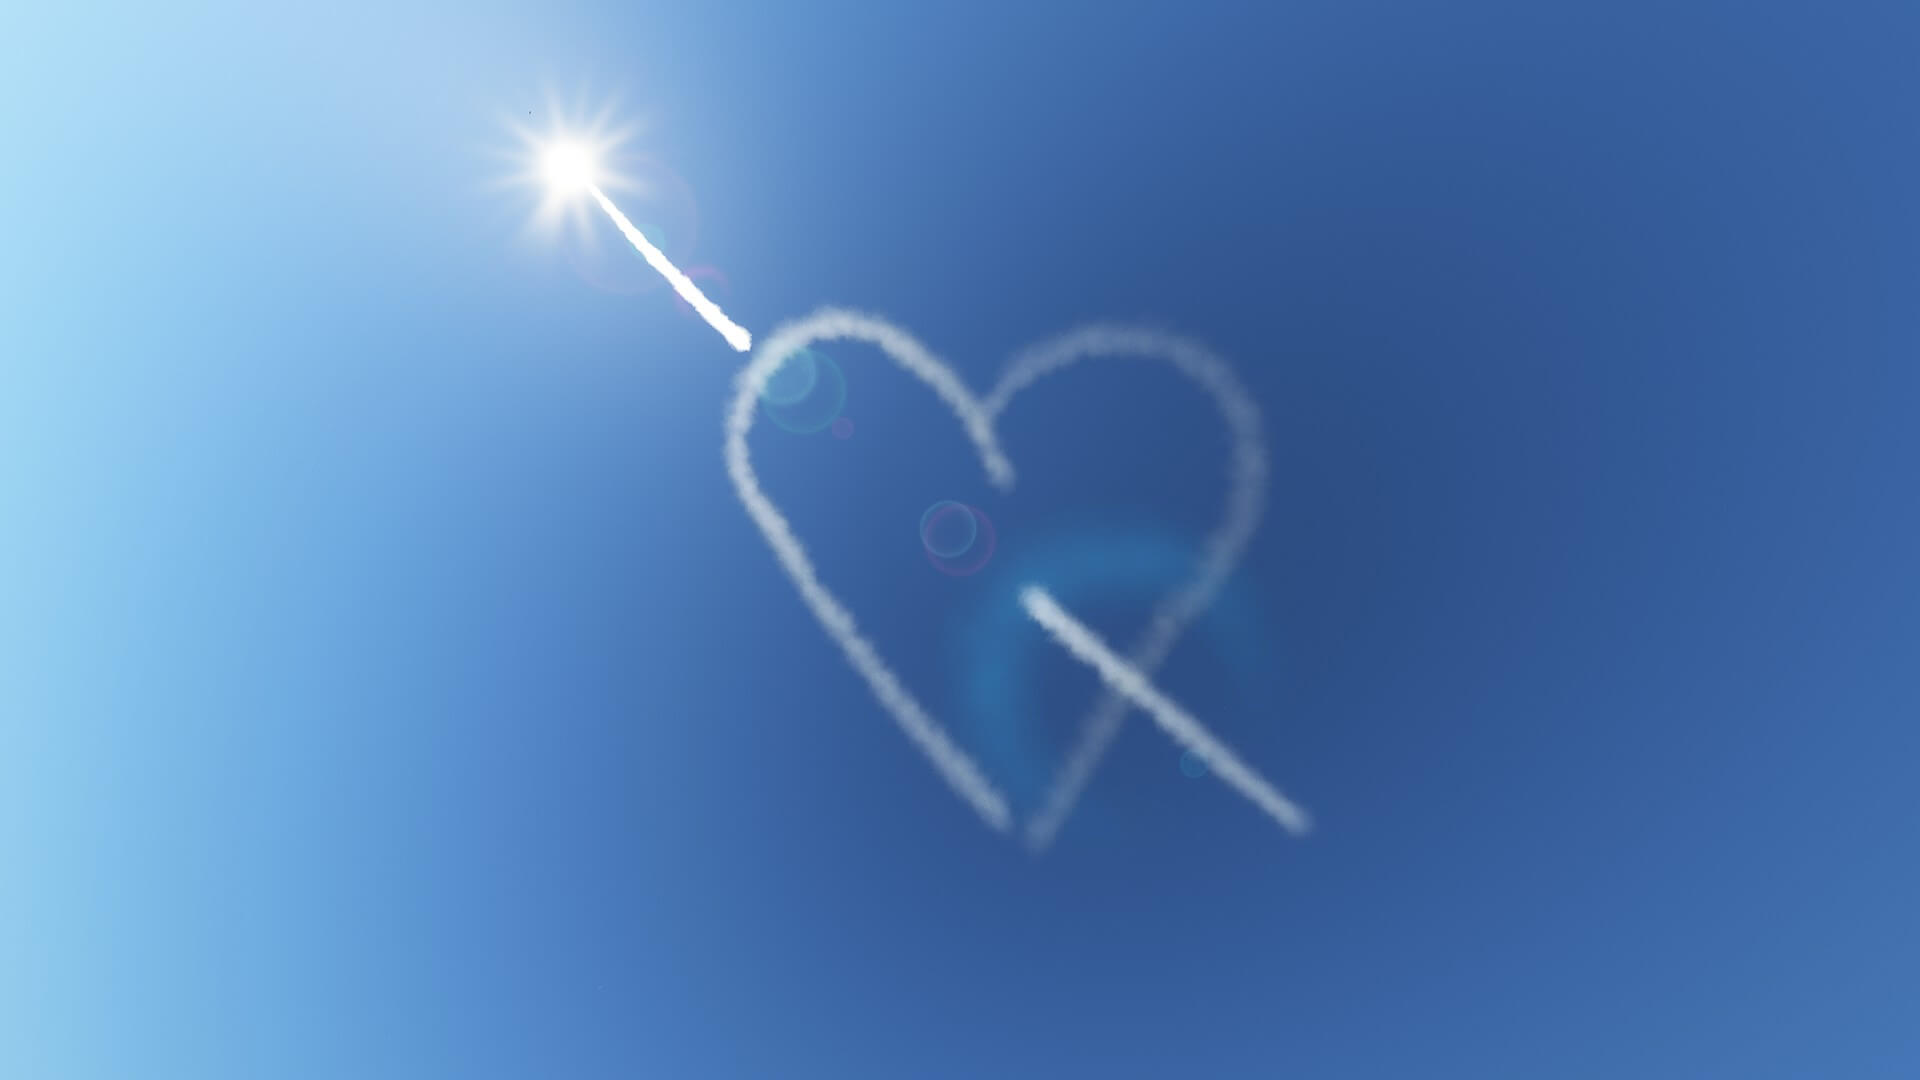 White smoke fills the sky as a love heart is drawn with arrow piercing through it.